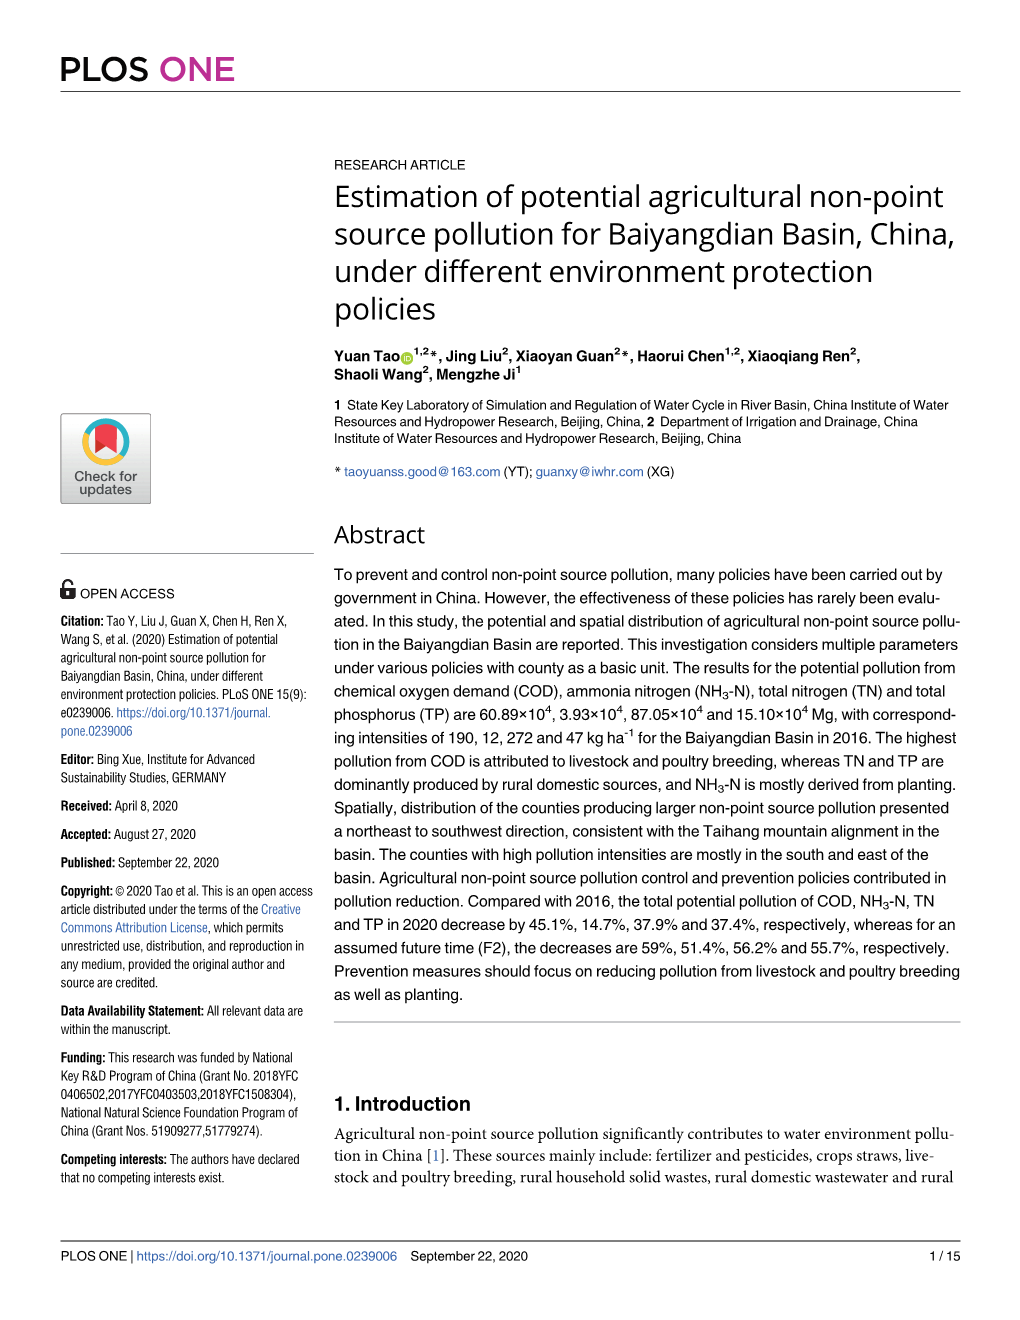 Estimation of Potential Agricultural Non-Point Source Pollution for Baiyangdian Basin, China, Under Different Environment Protection Policies